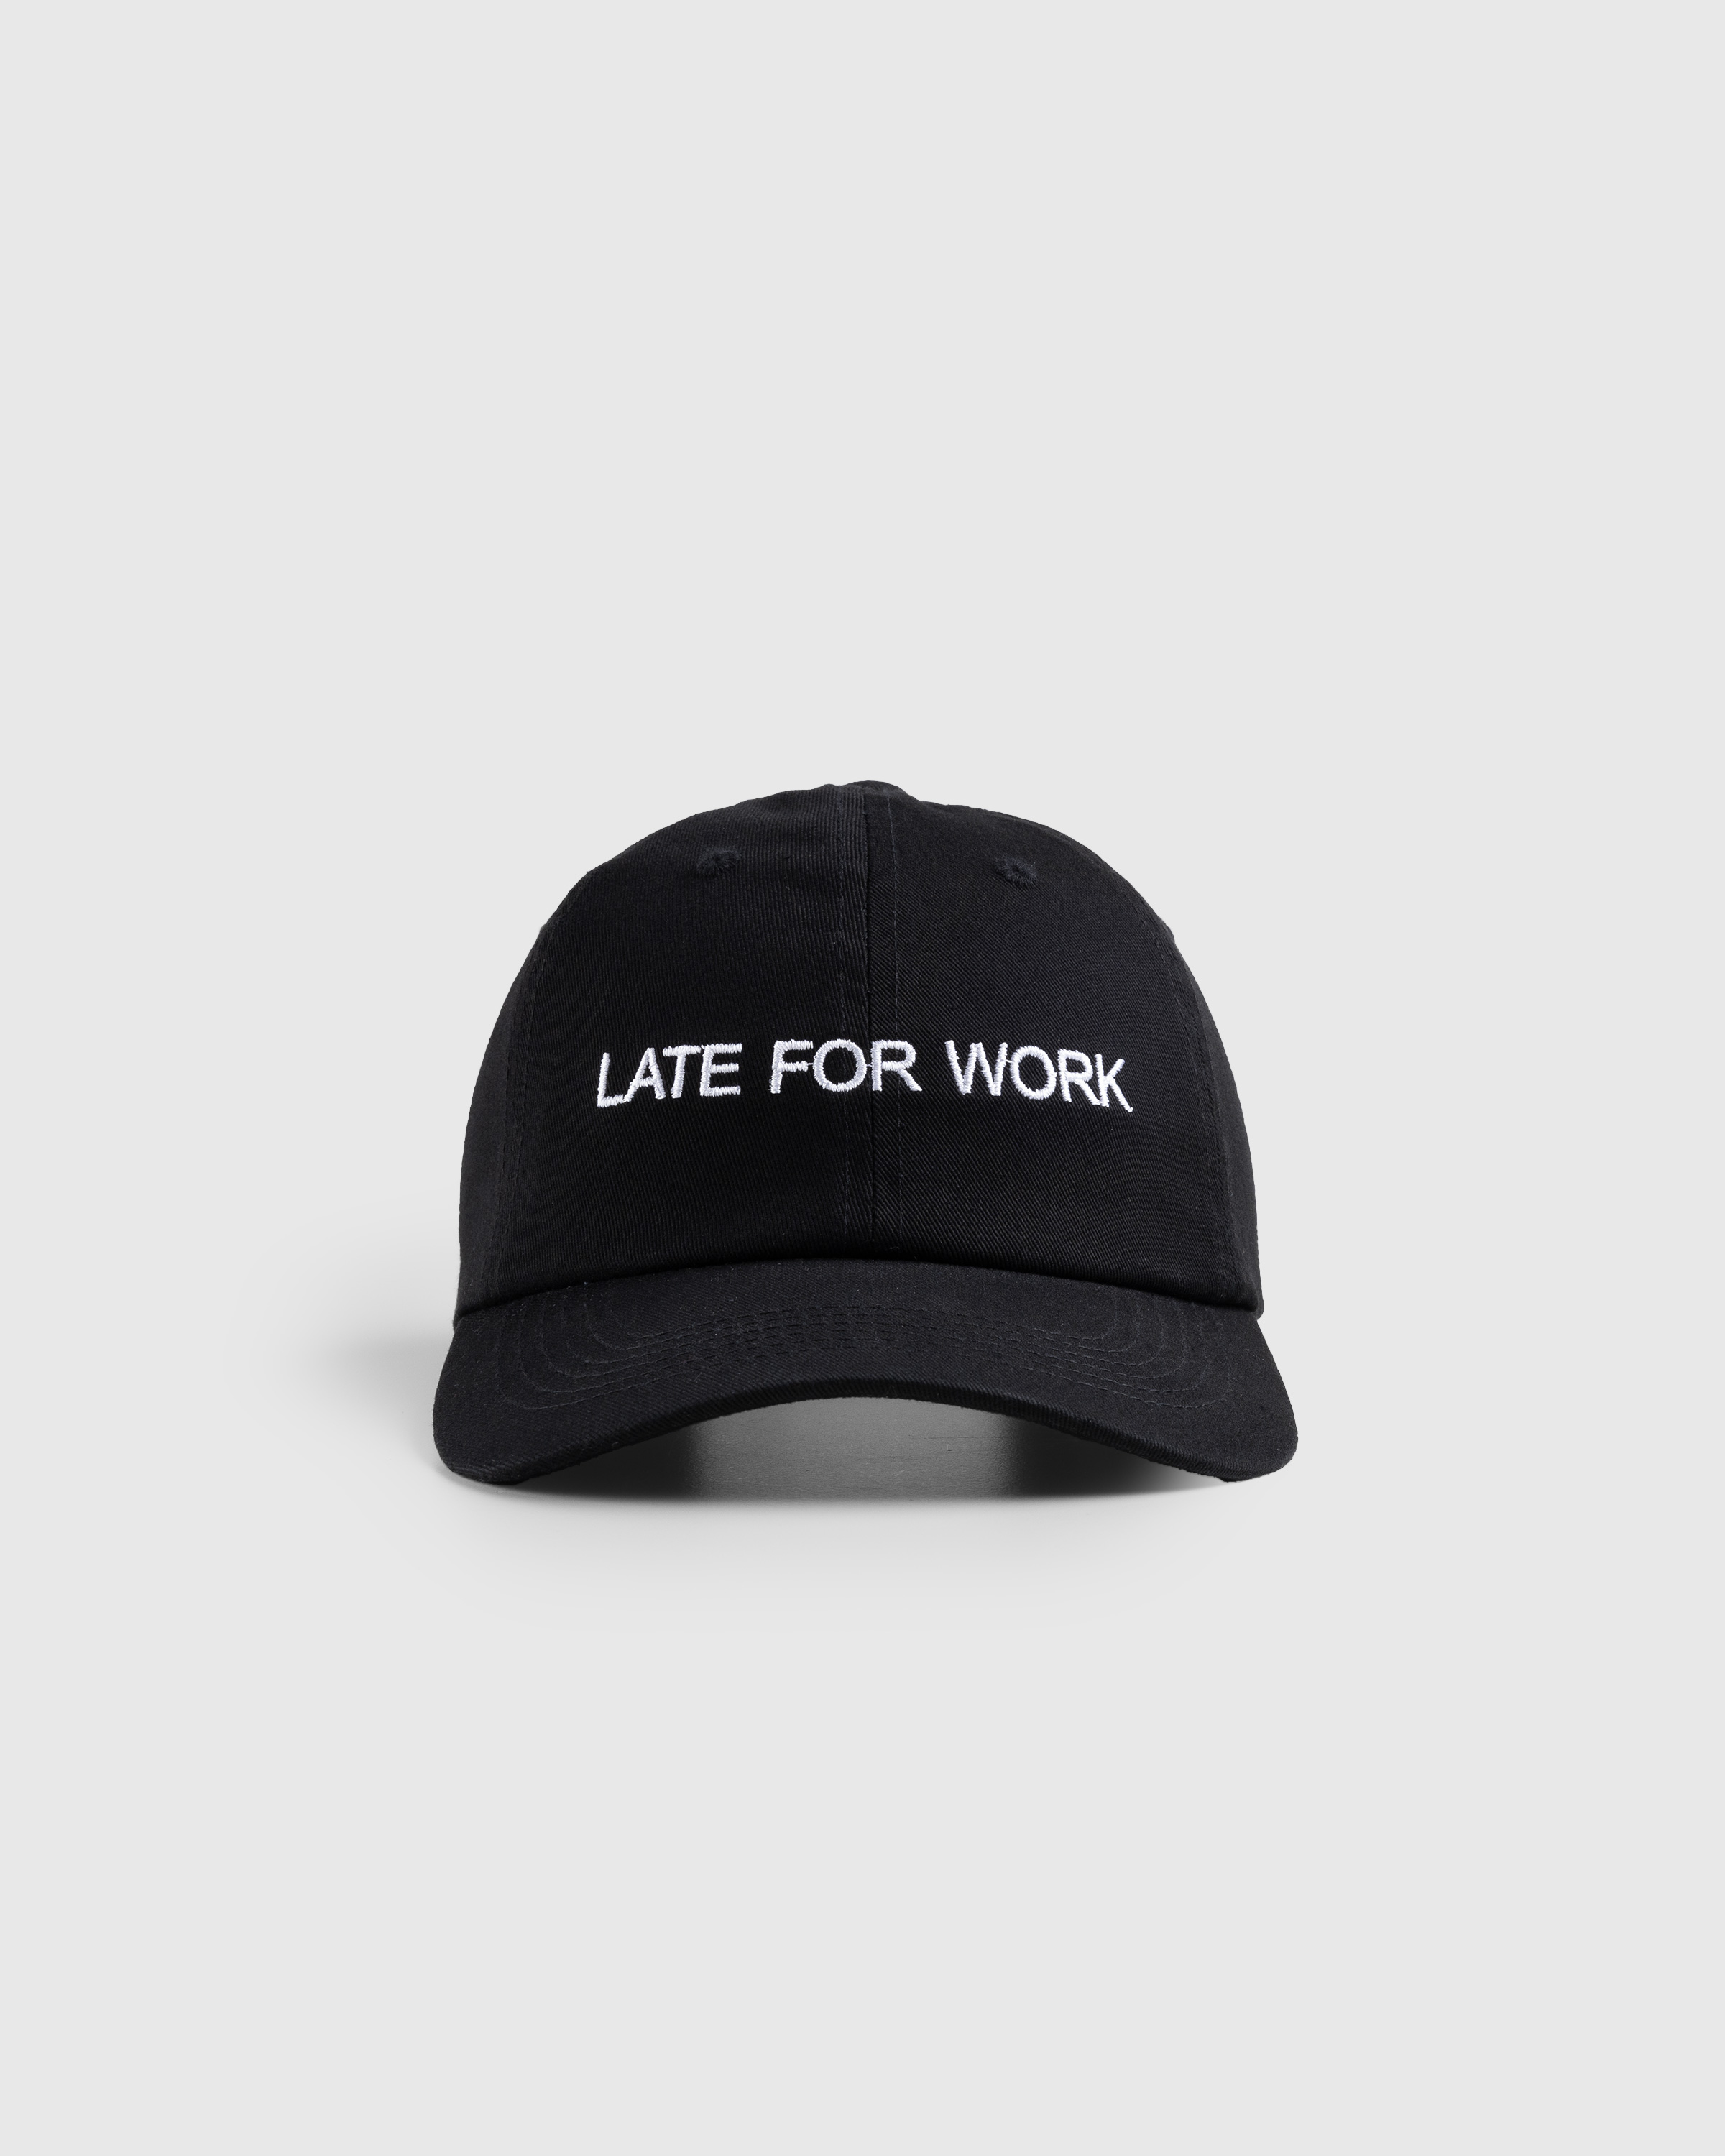 HO HO COCO – Late For Work Hat Black/White - Caps - Black - Image 4